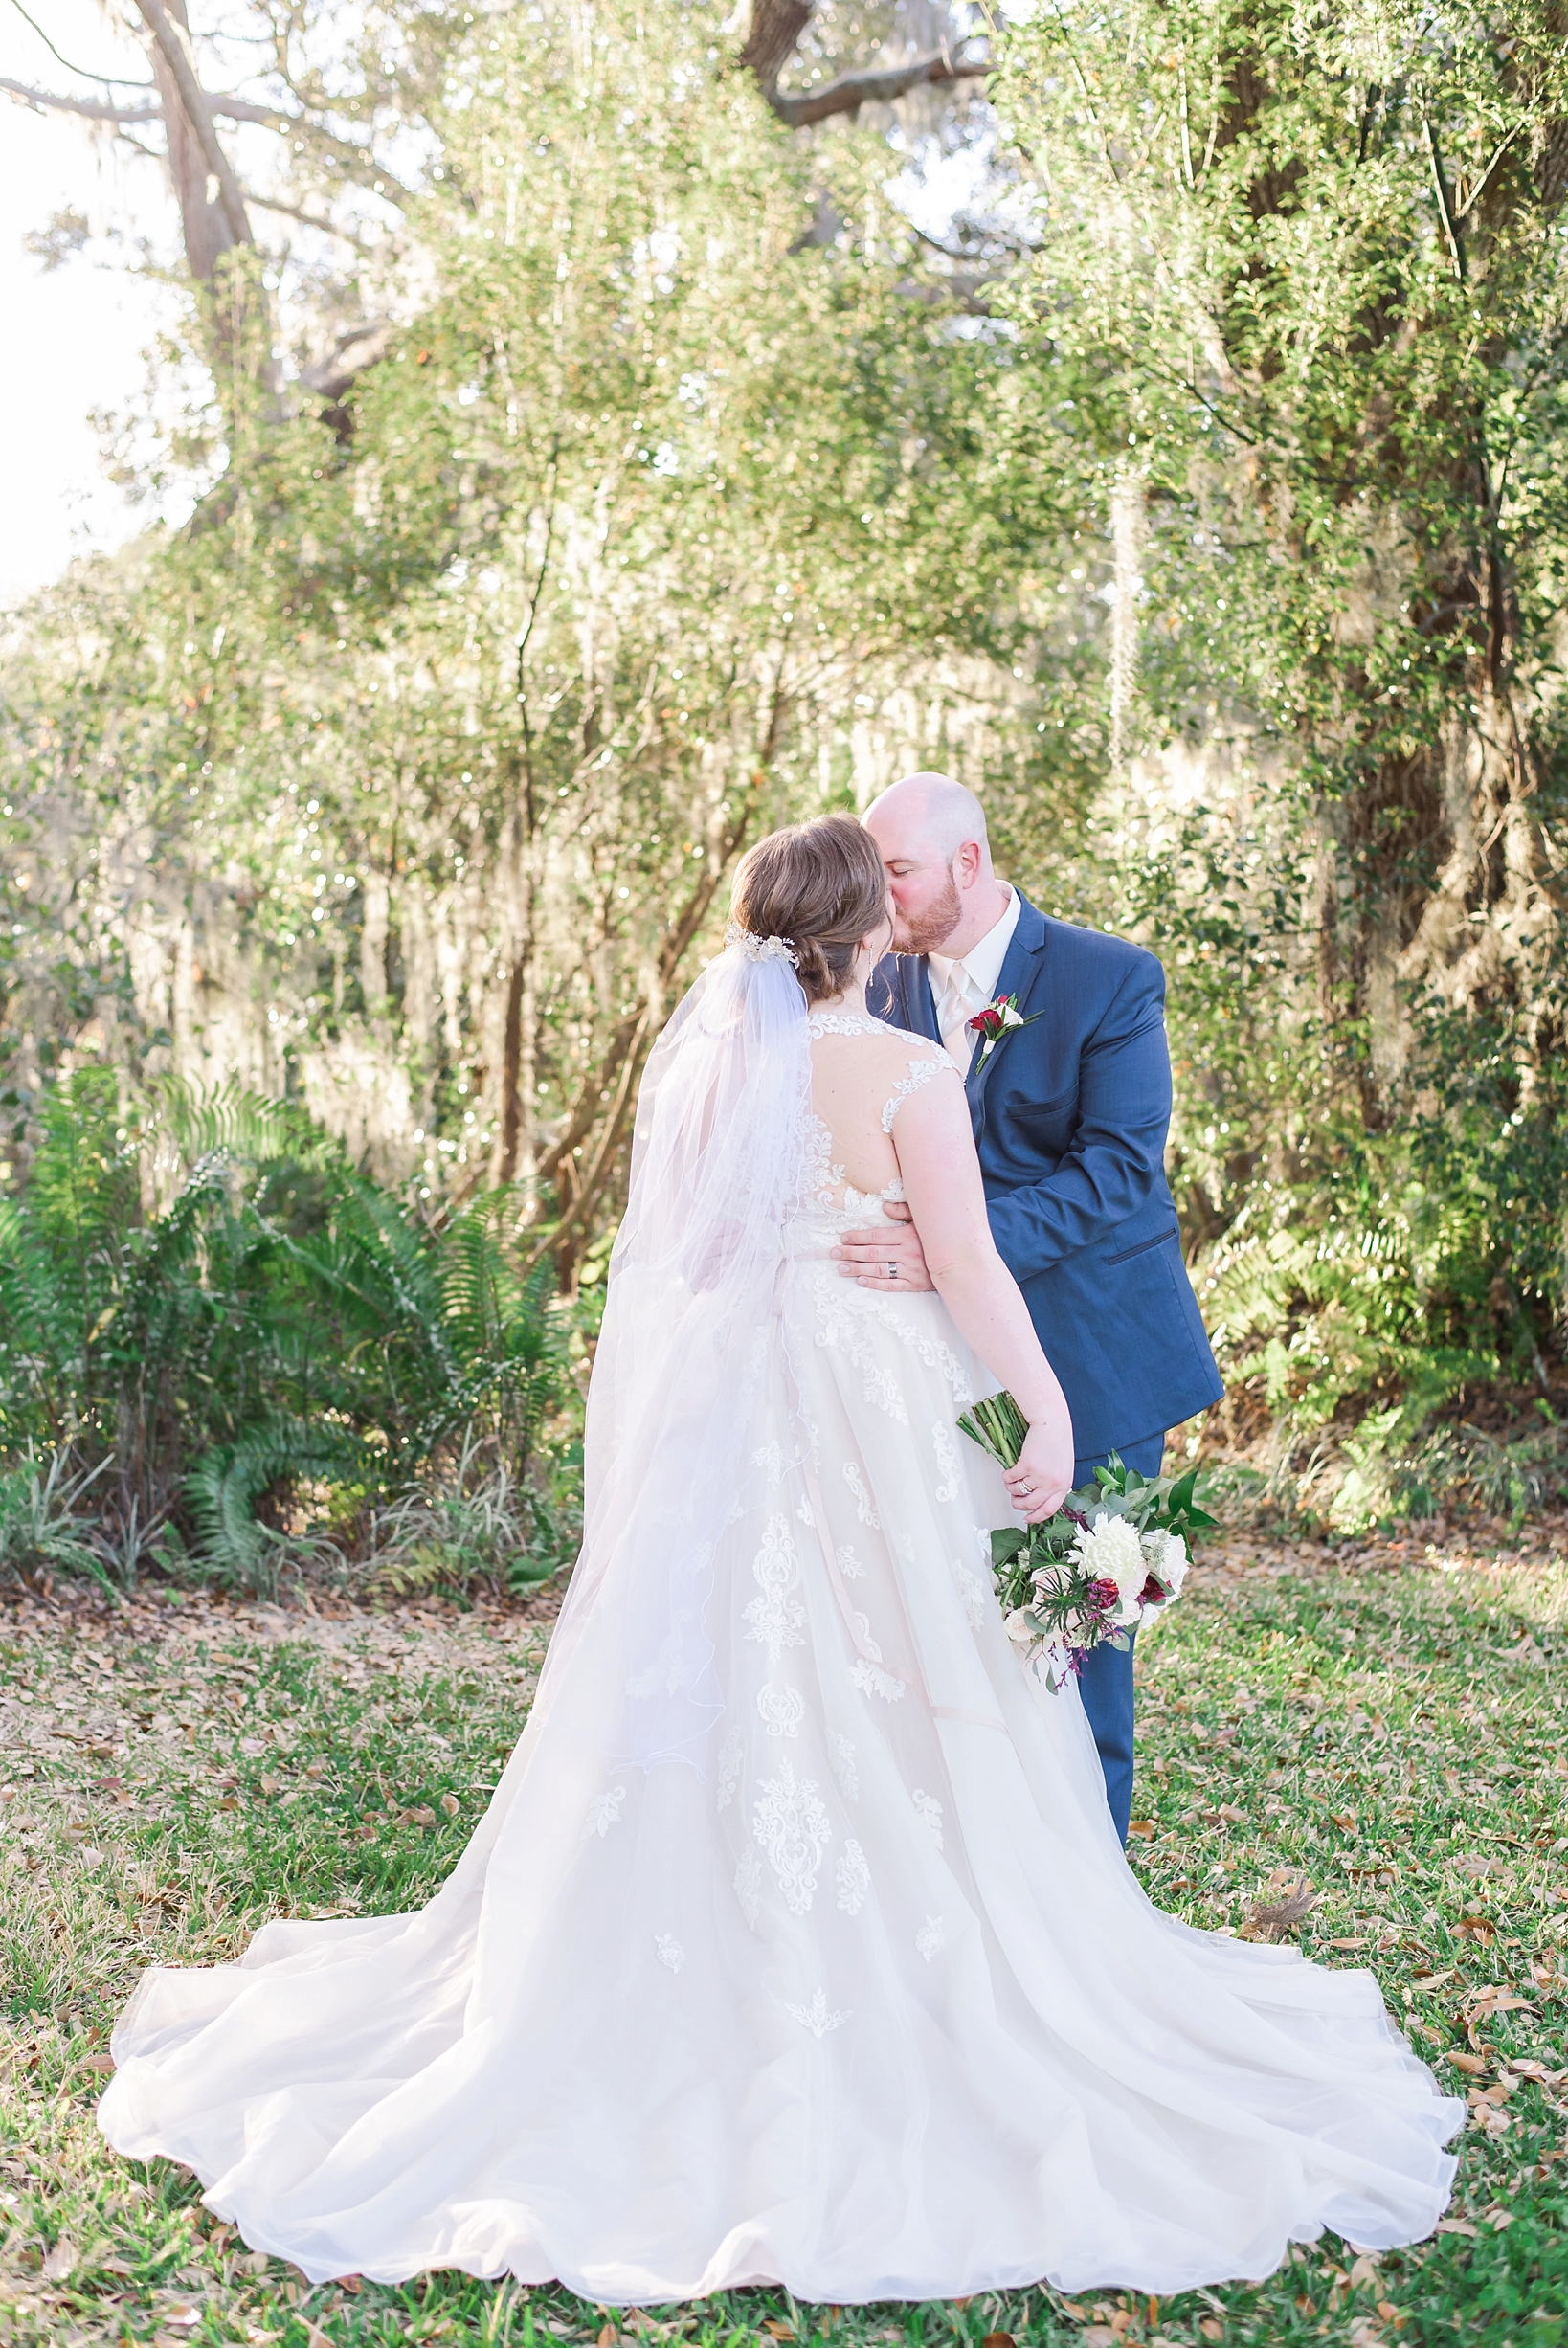 Flowing wedding gown on the bride as they share a kiss in the rustic forests of Seffner, FL